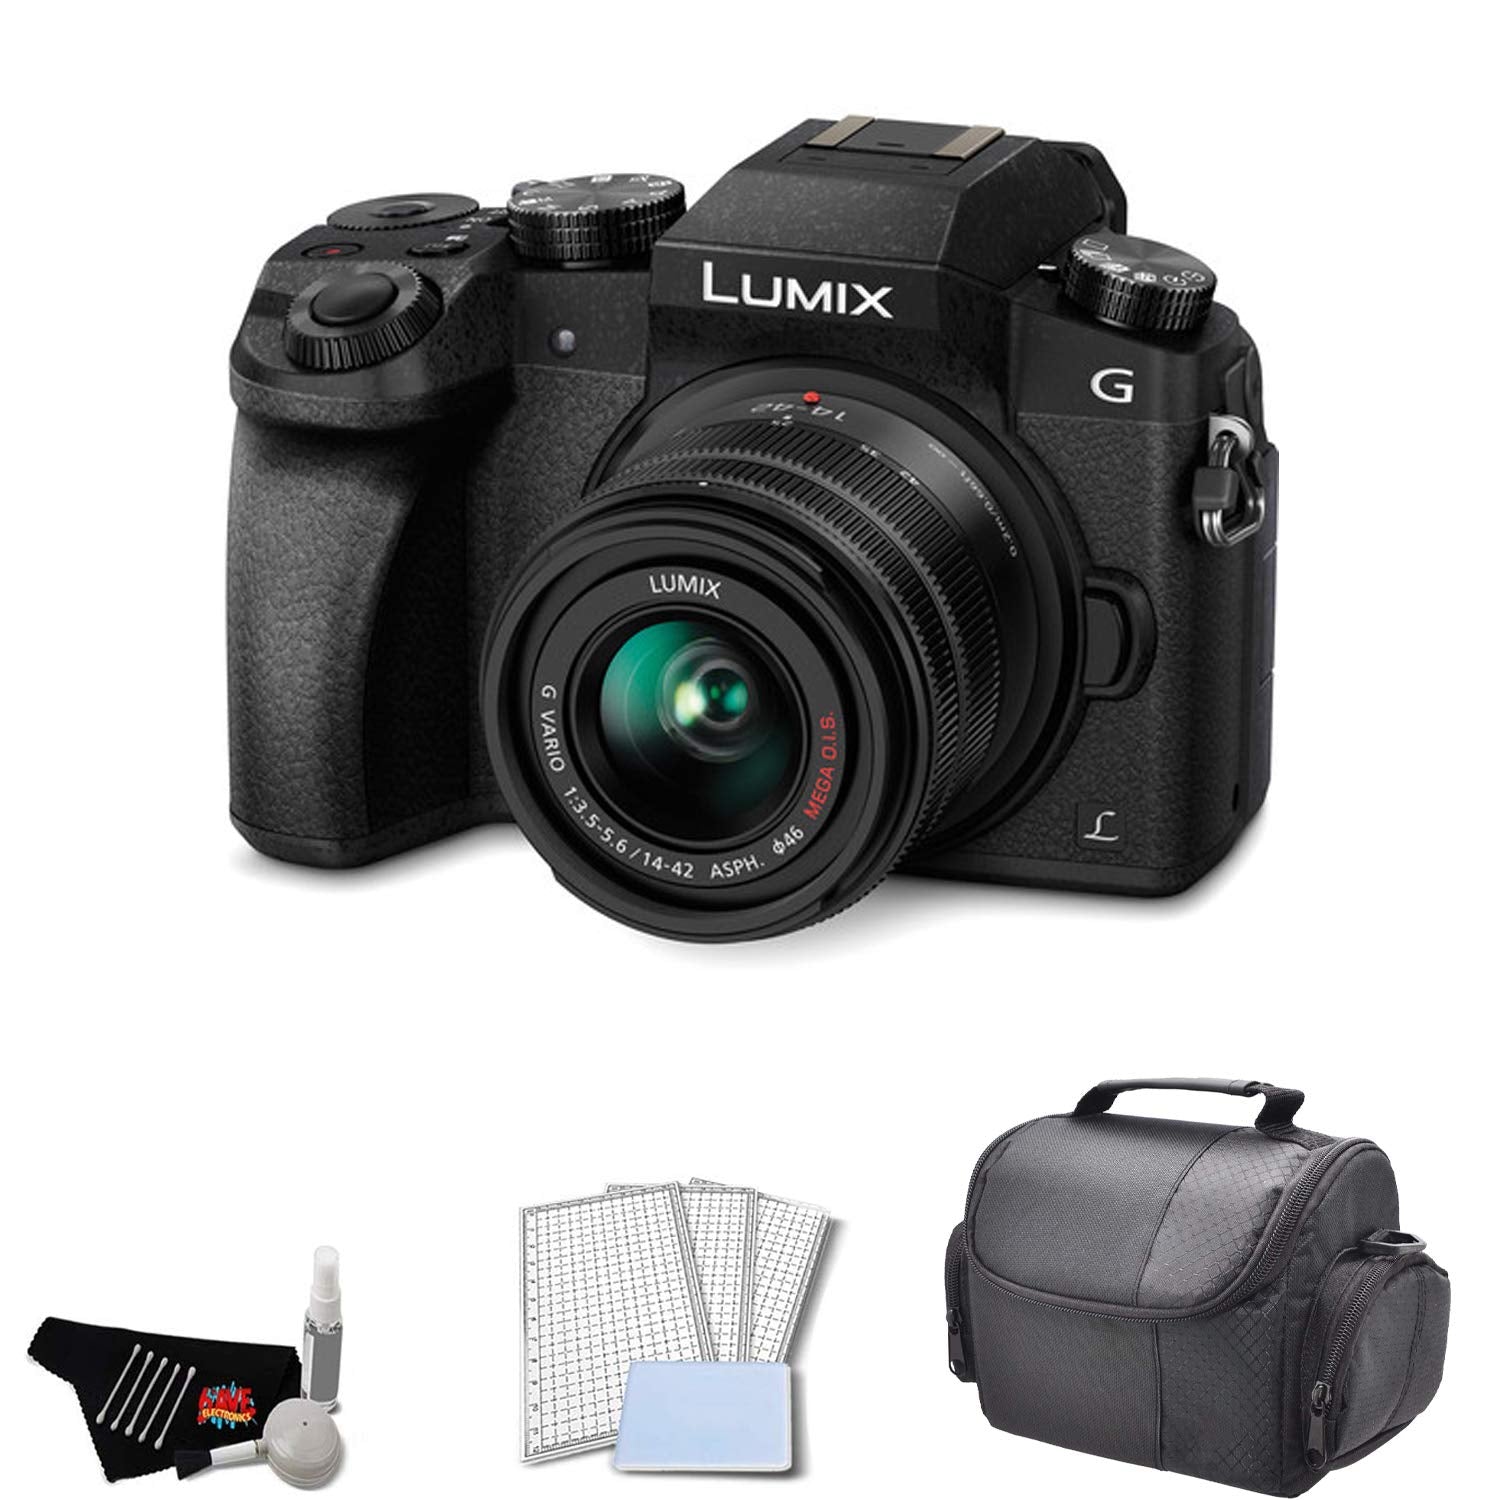 Panasonic Lumix DMC-G7 Mirrorless Micro Four Thirds Digital Camera with 14-42mm Lens (Black) - Bundle with Carrying Case